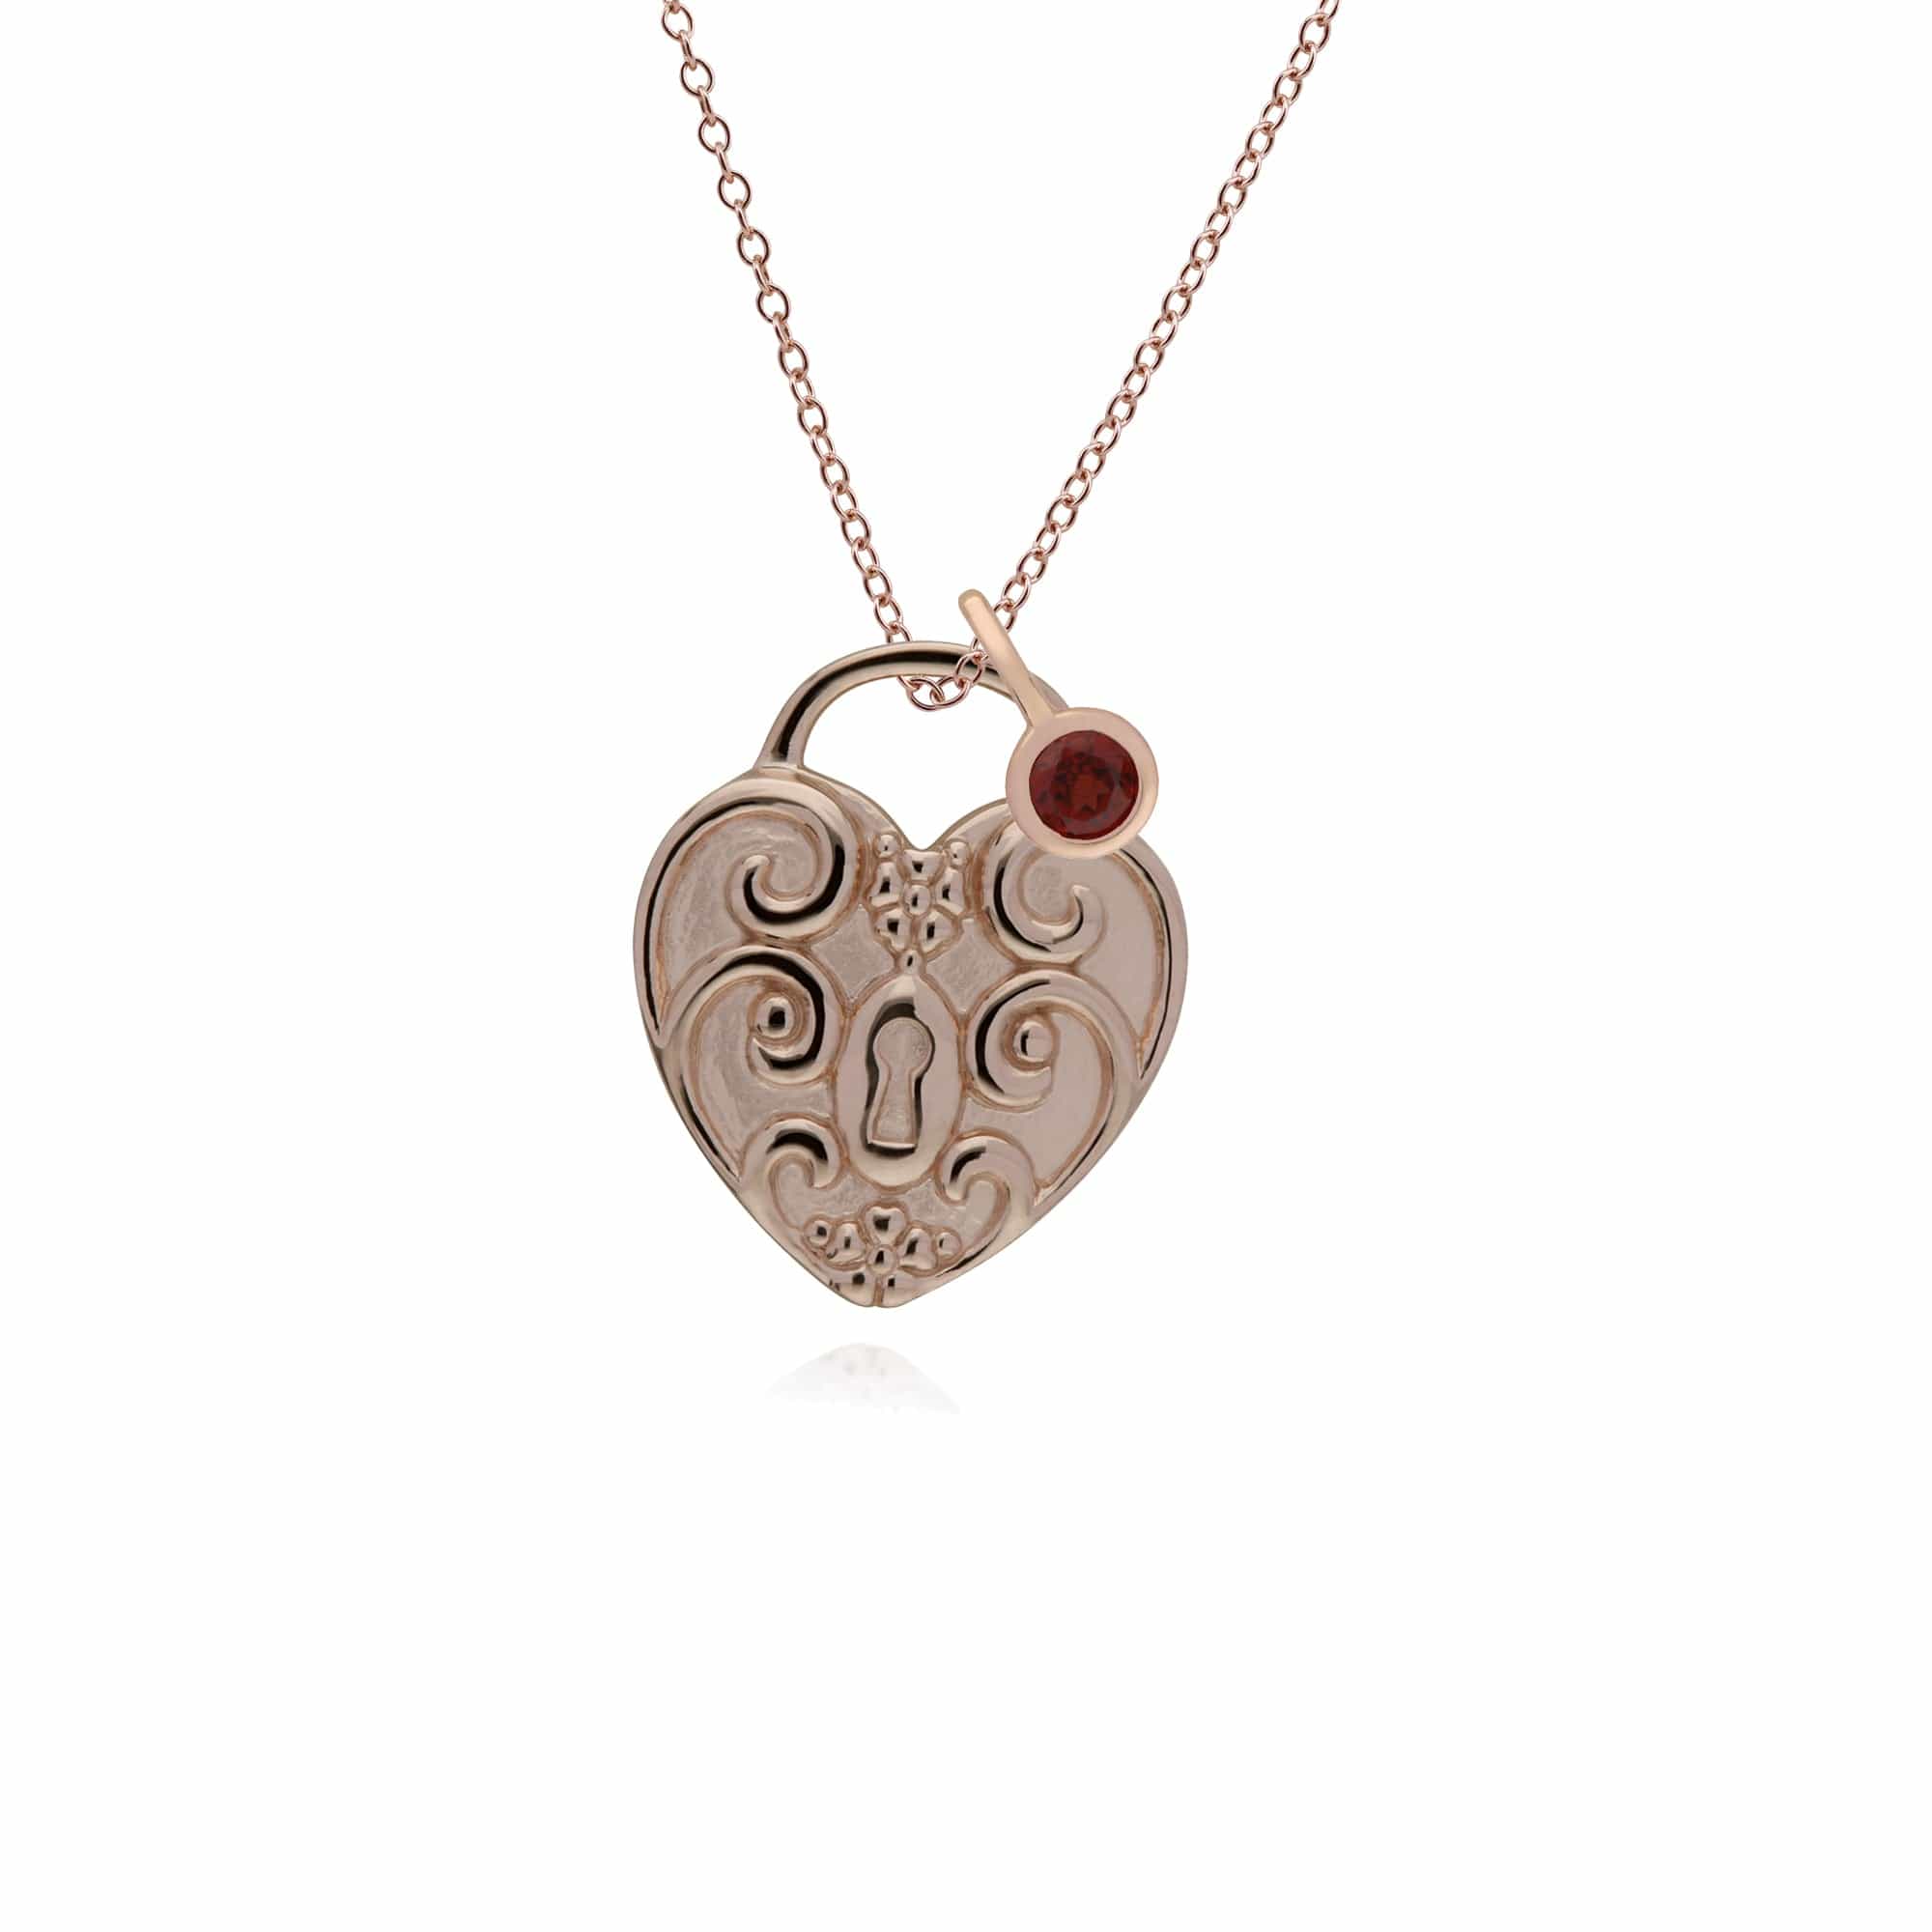 270P027304925-270P026501925 Classic Swirl Heart Lock Pendant & Garnet Charm in Rose Gold Plated 925 Sterling Silver 1